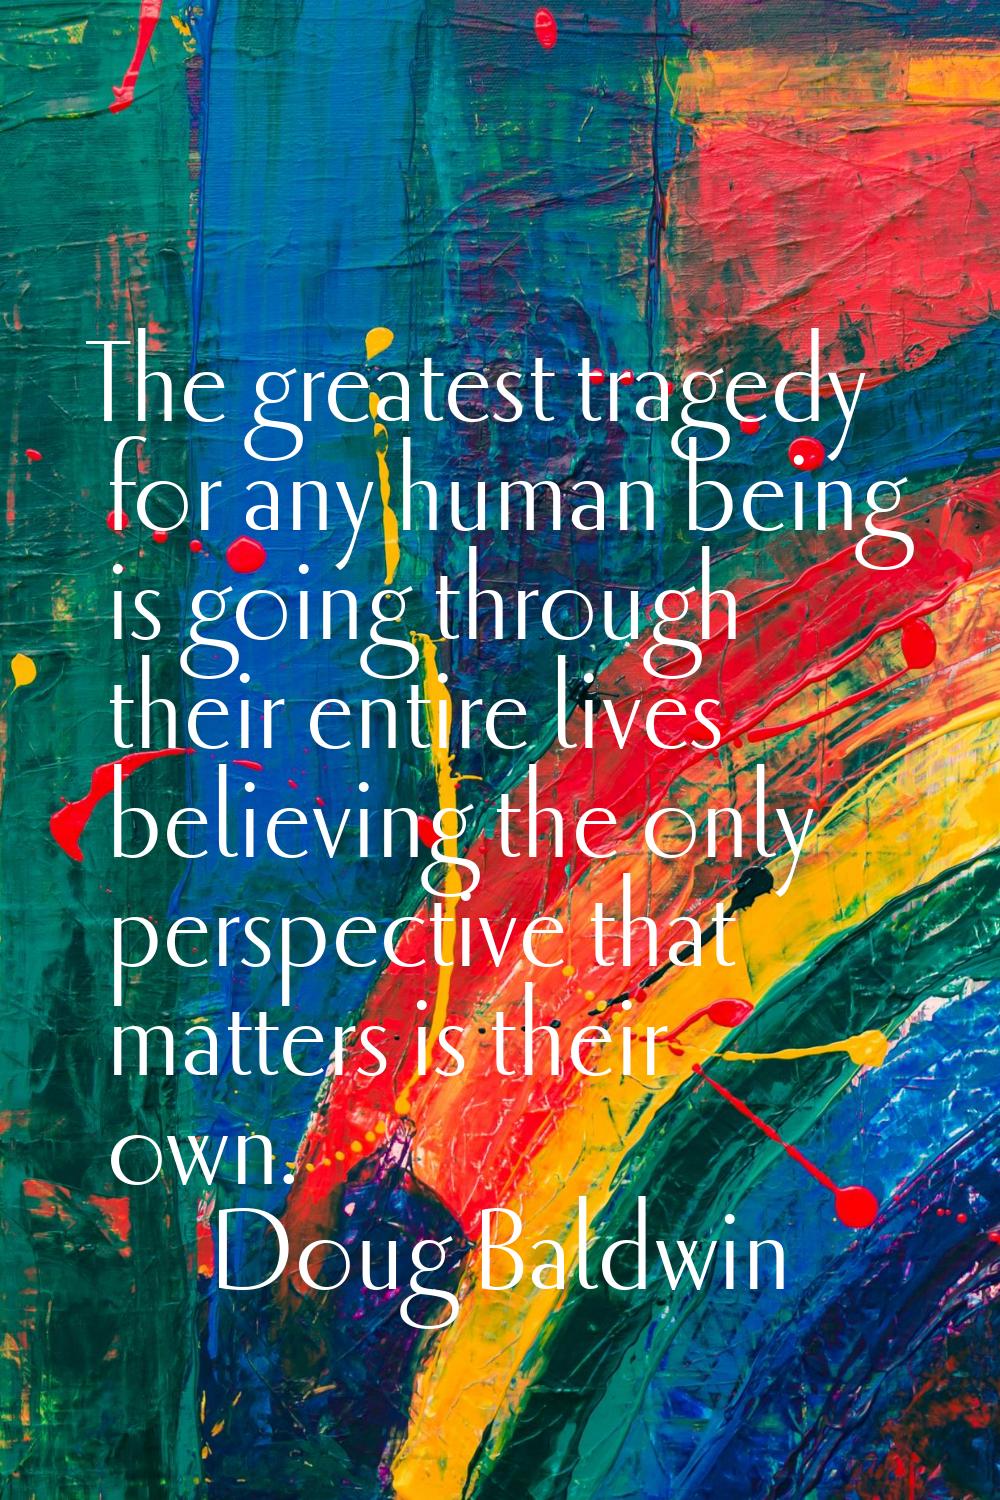 The greatest tragedy for any human being is going through their entire lives believing the only per